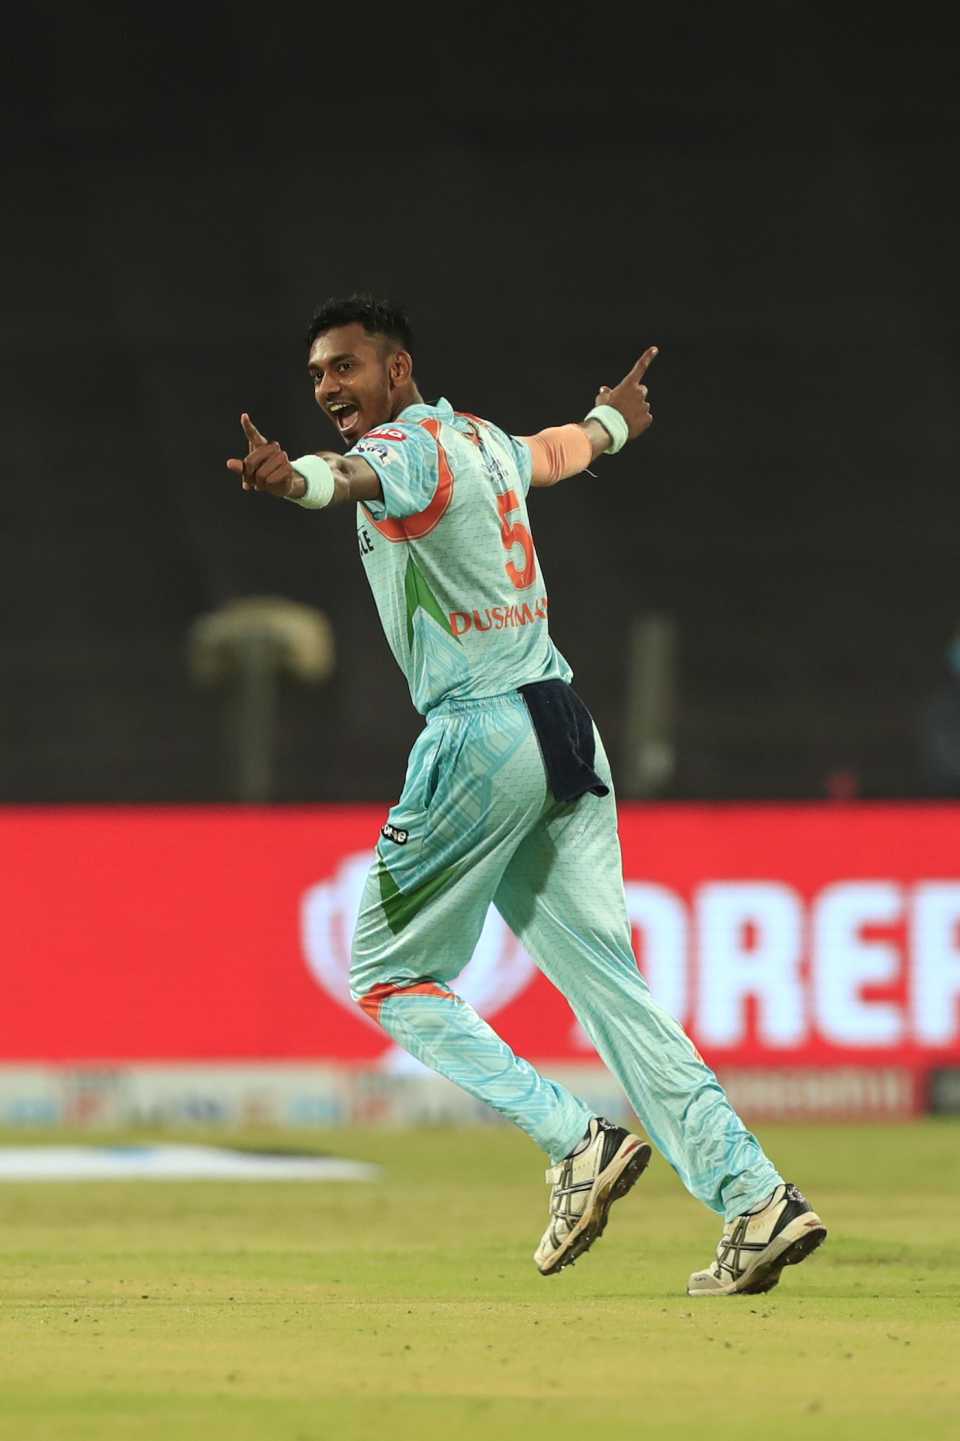 Dushmantha Chameera picked up the big wickets of Mayank Agarwal and Jonny Bairstow, Lucknow Super Giants vs Punjab Kings, IPL 2022, Pune, April 29, 2022